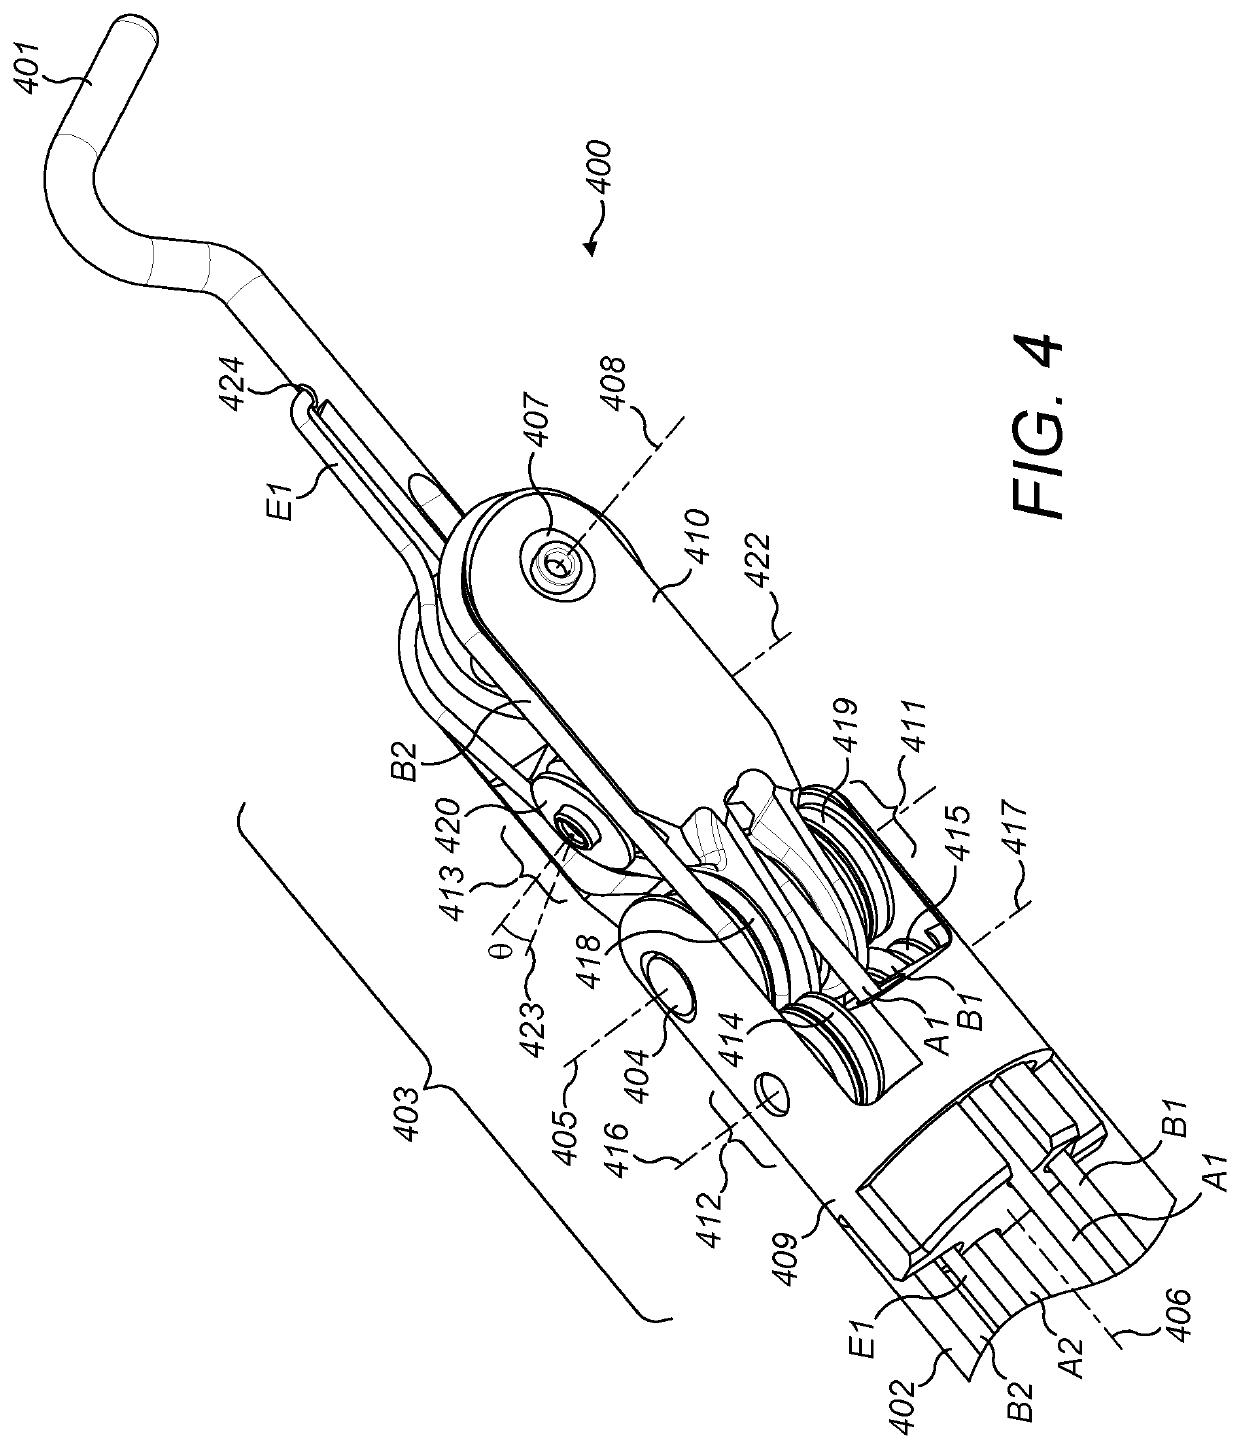 Powering a bipolar electrocautery surgical instrument